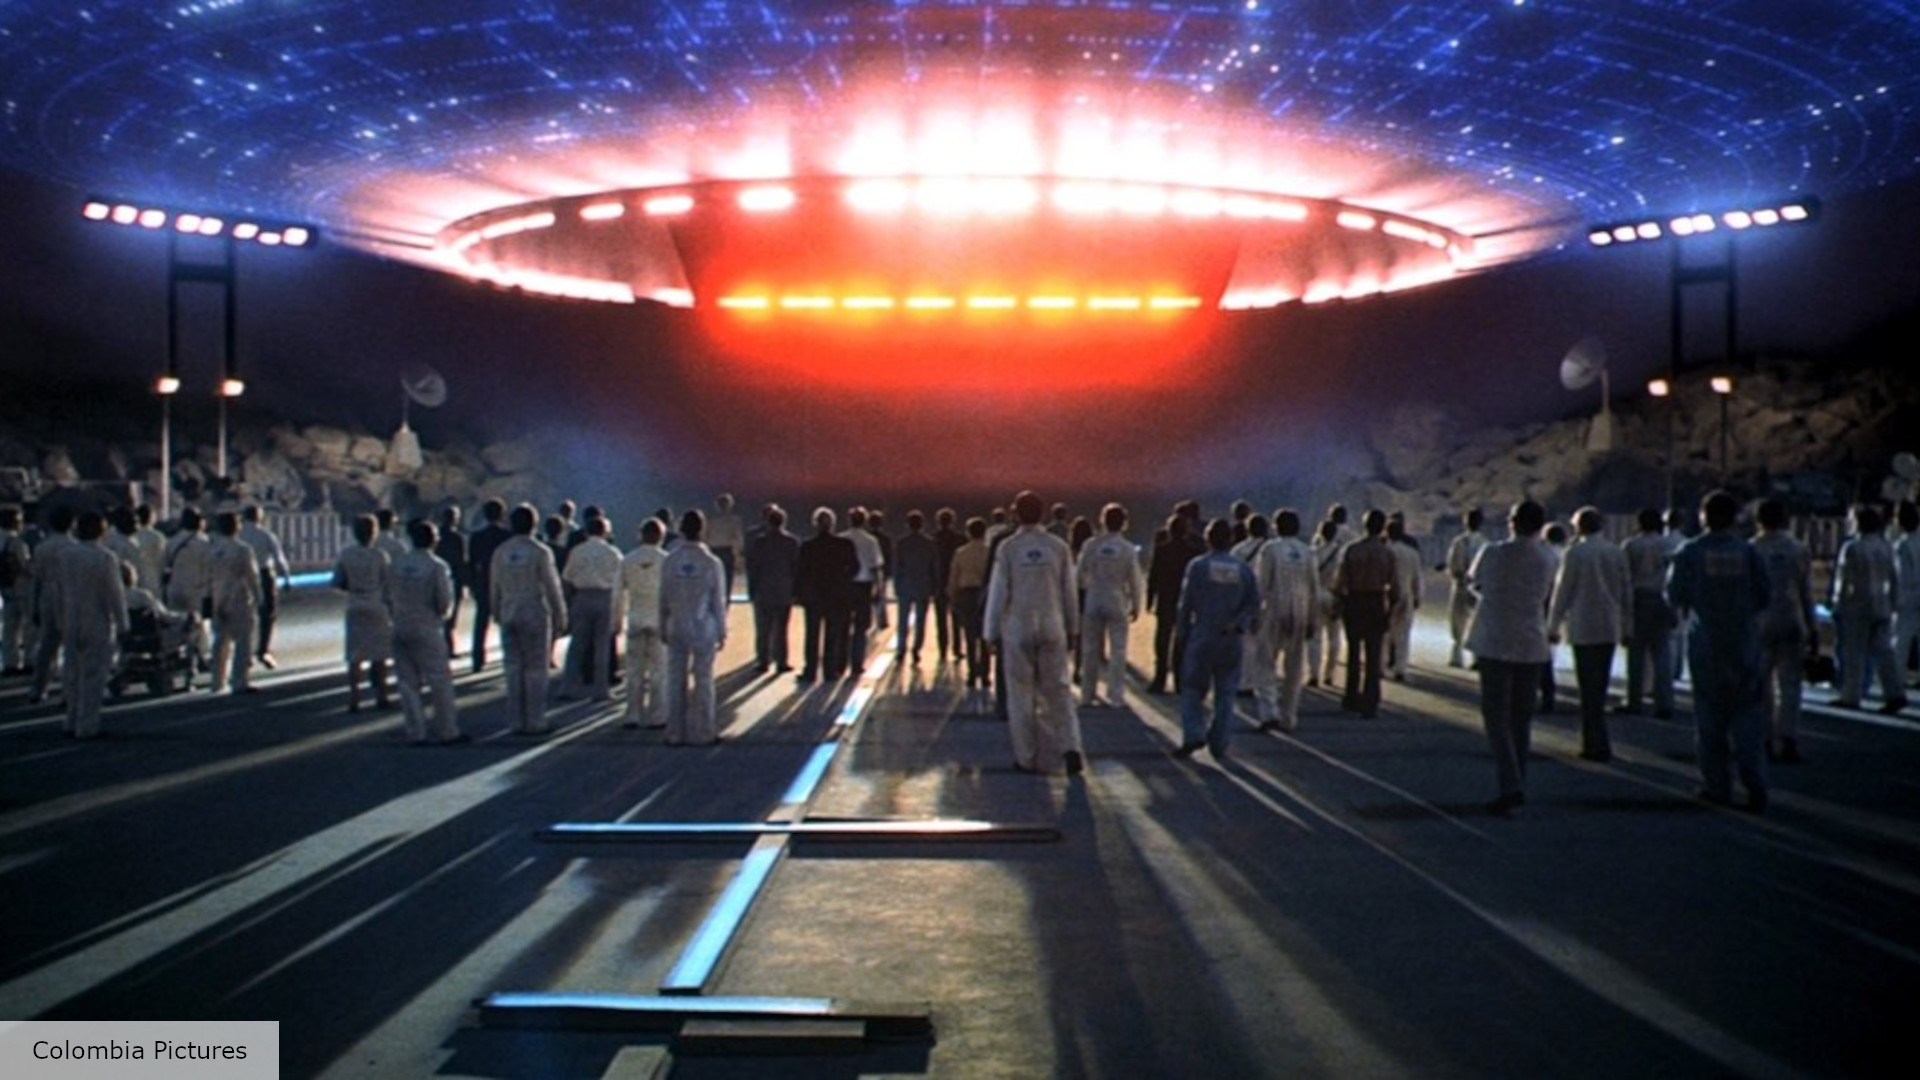 Best Steven Spielberg movies: Close Encounters of the Third kind